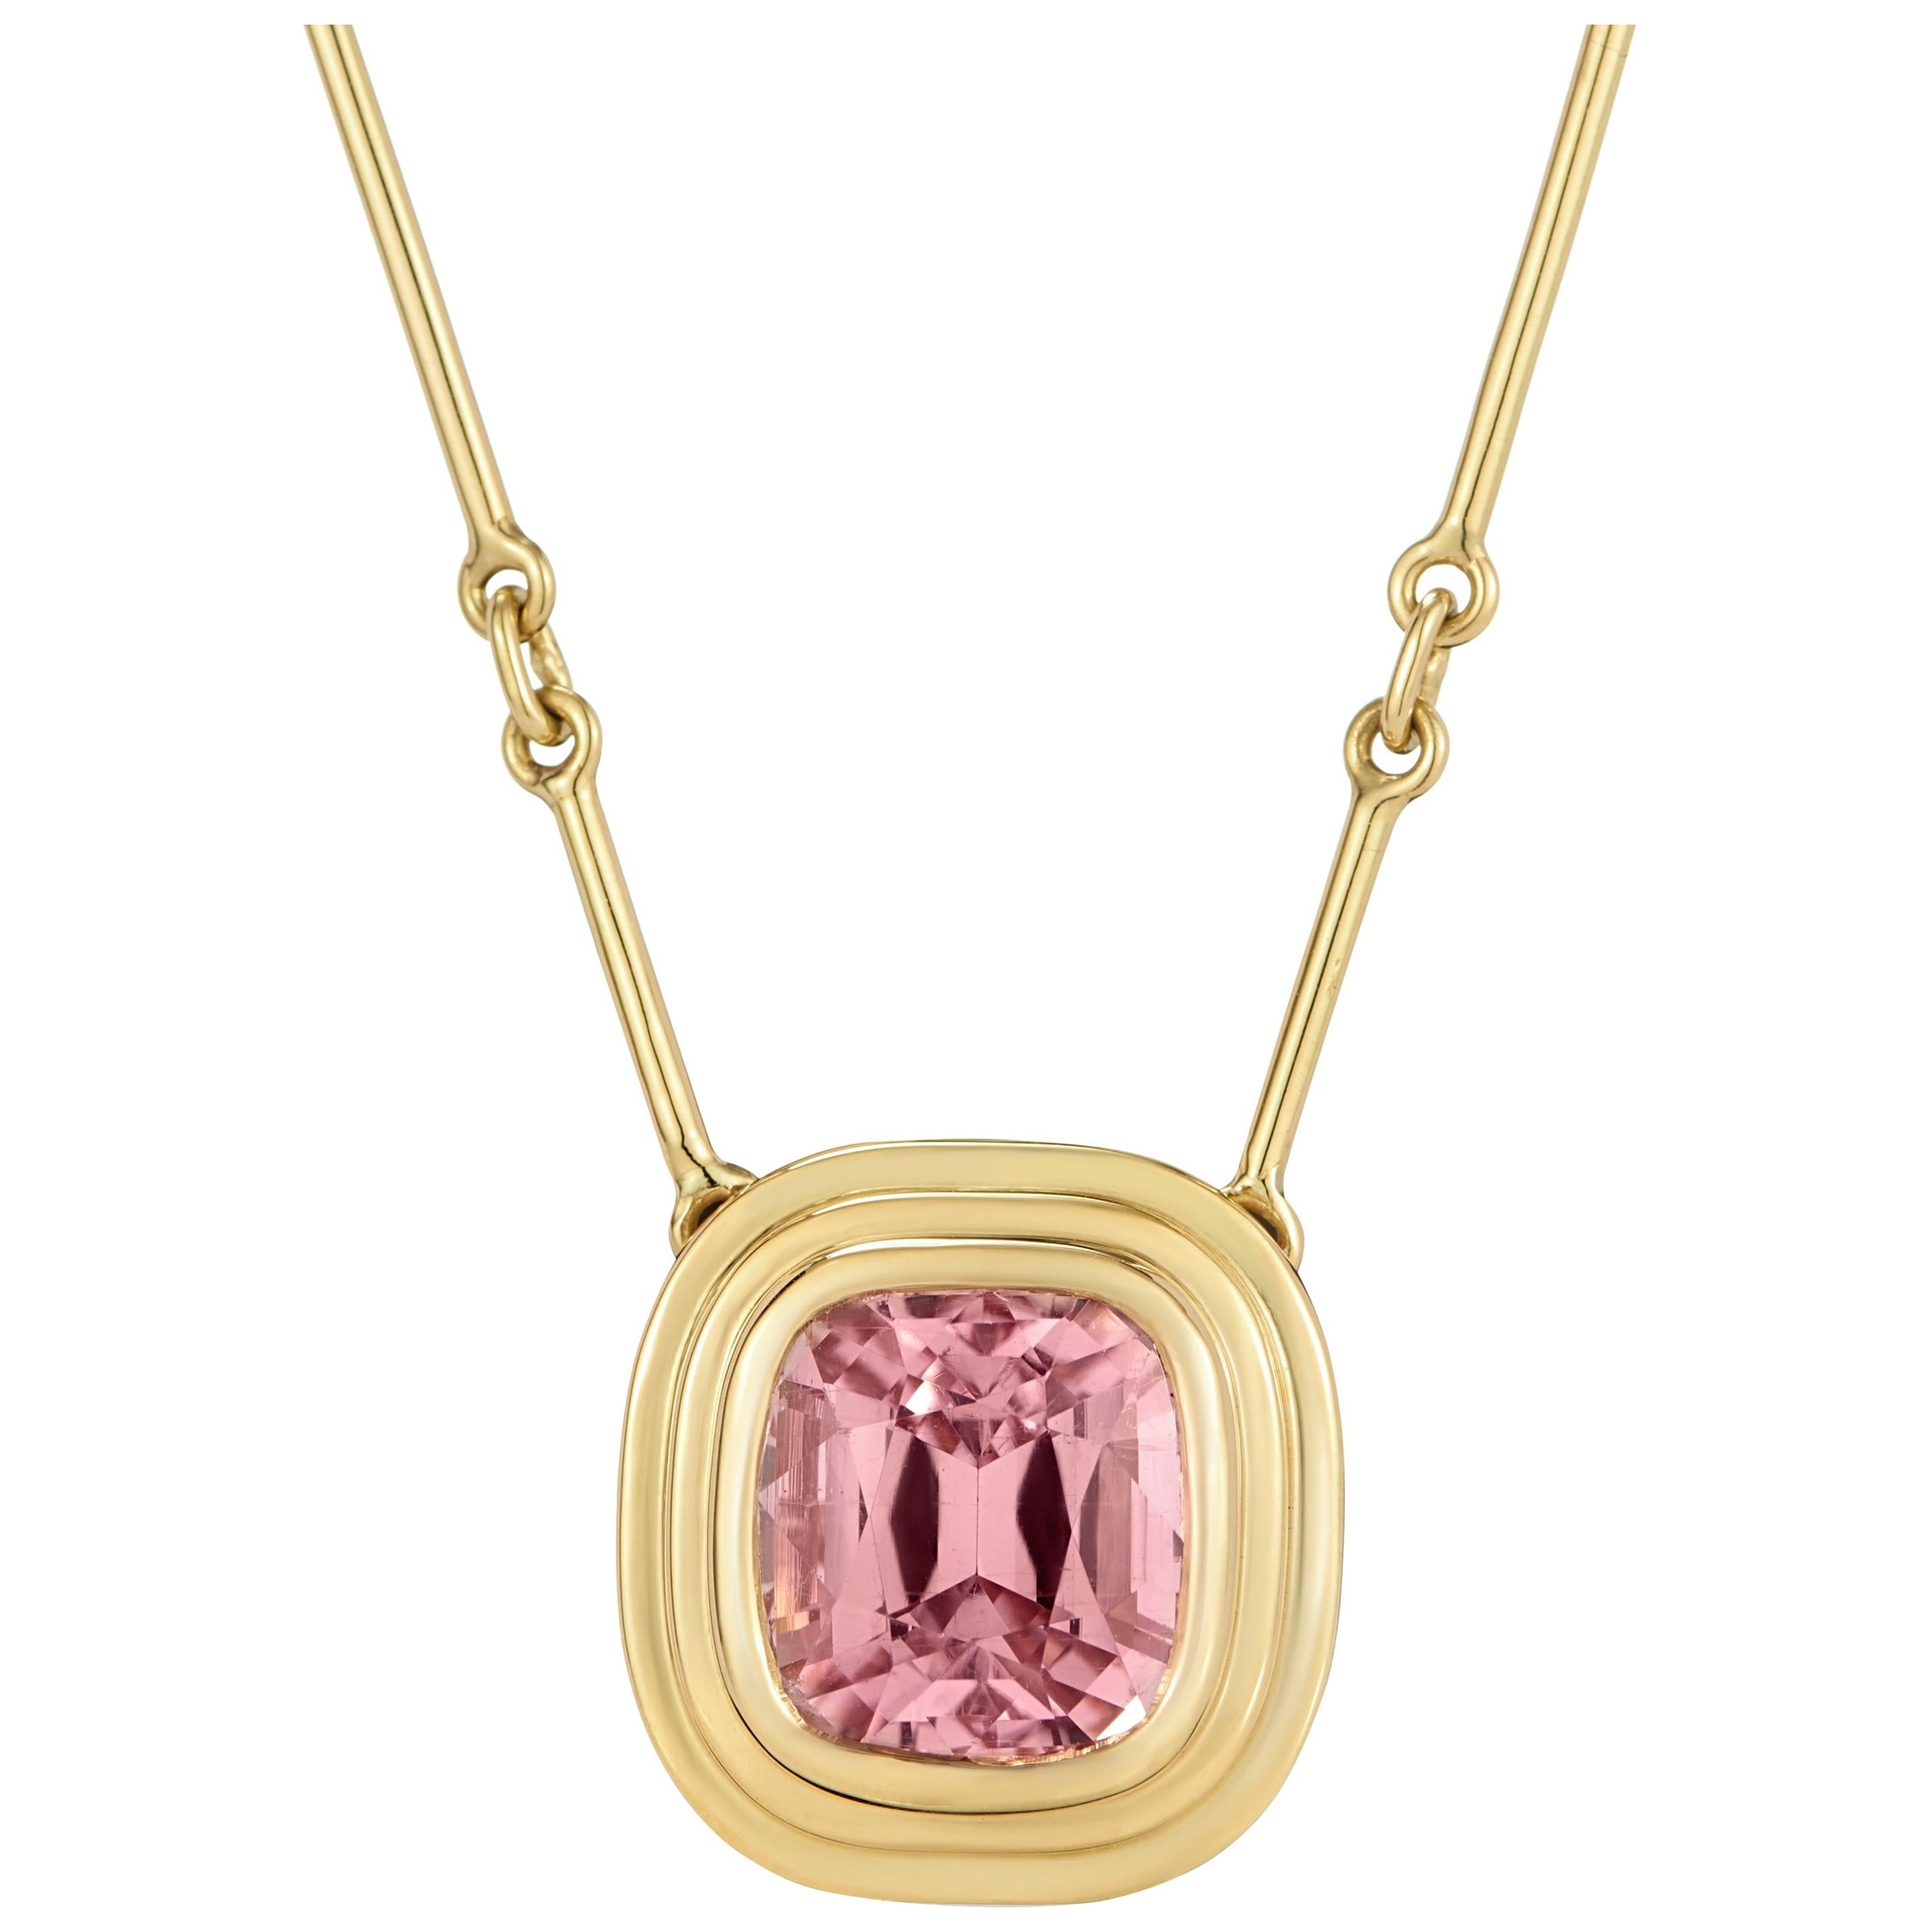 Athena: 1.24ct Cushion Cut Pink Tourmaline Necklace in 18k Yellow Gold